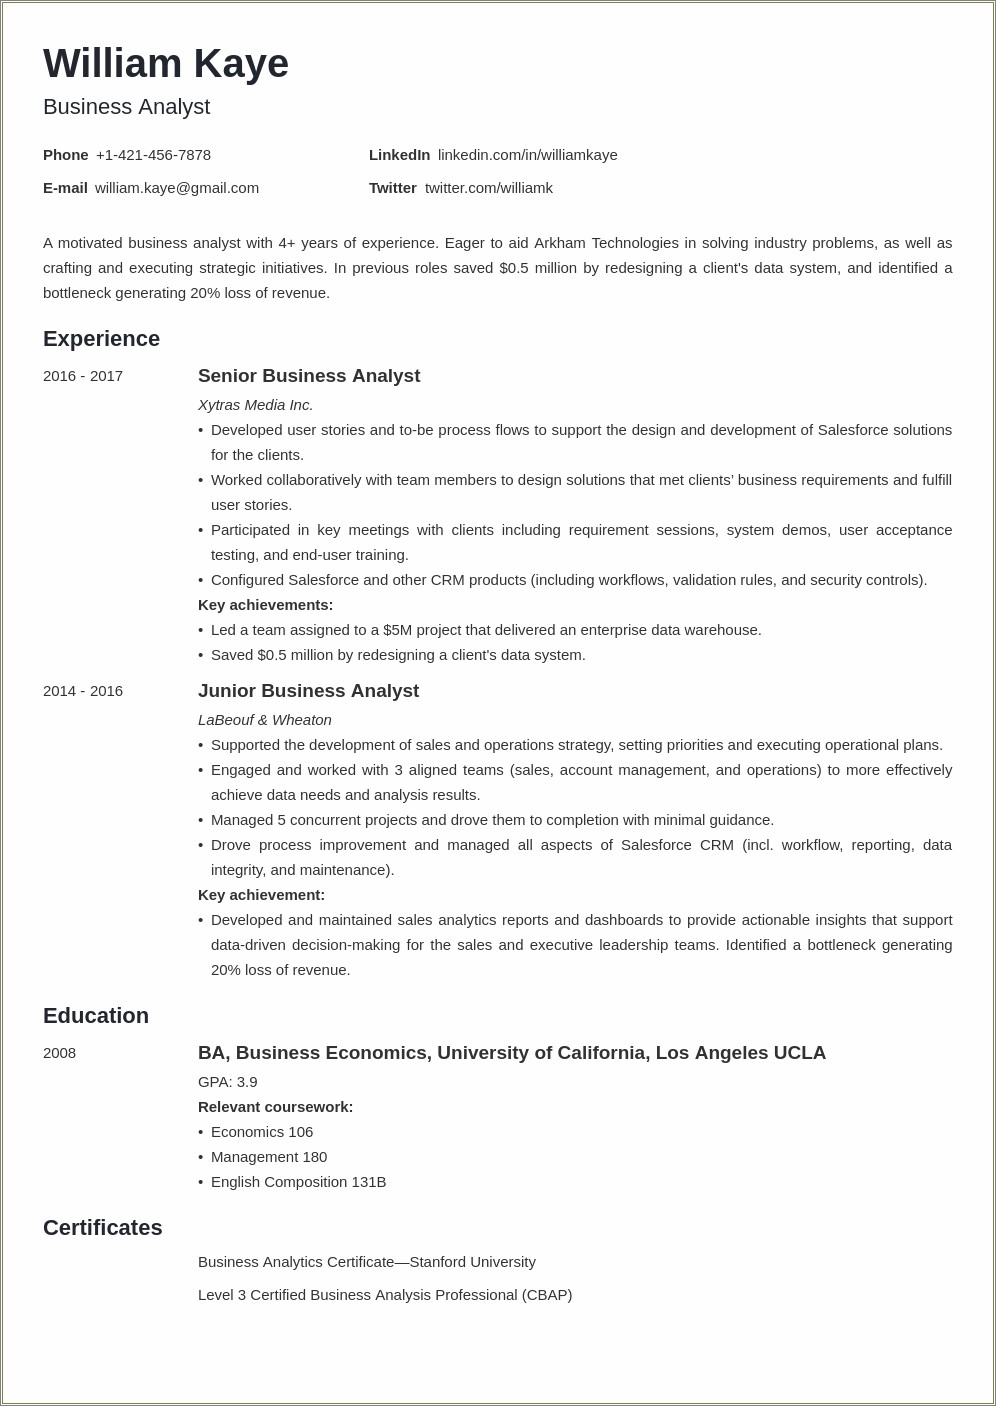 Sample Resume For Freshers In Banking Sector